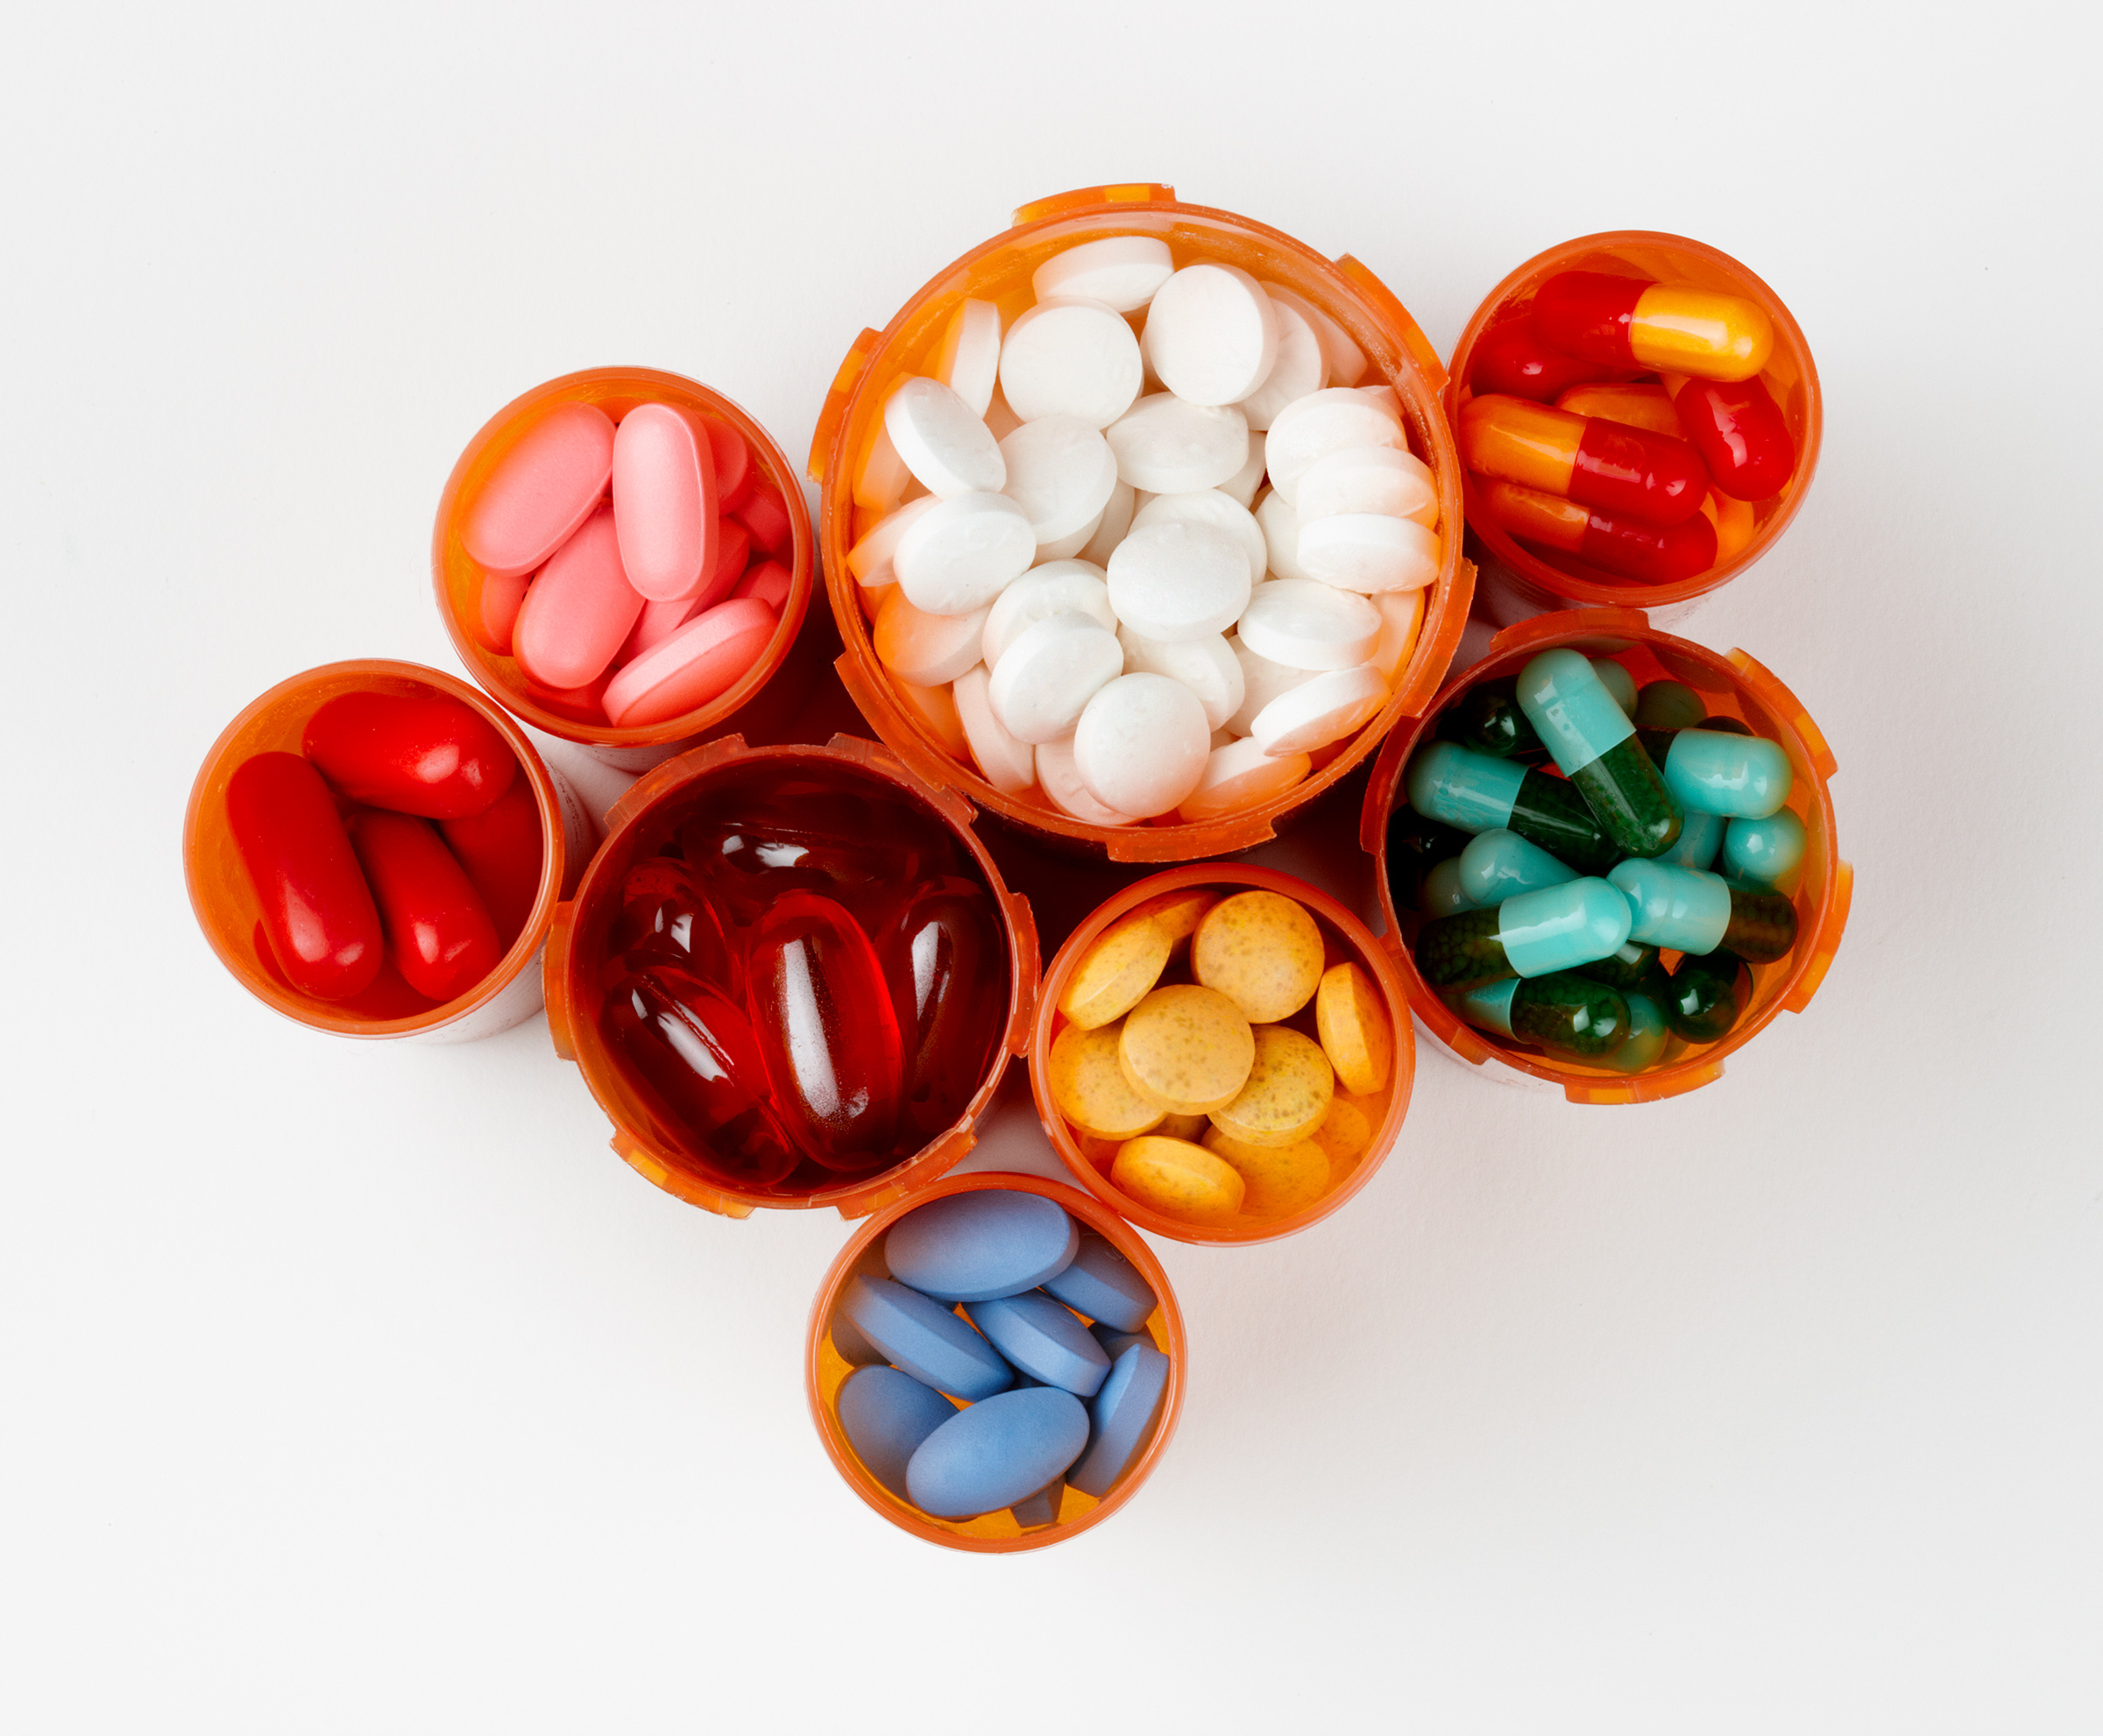 Cost Plus Drugs sells generic prescription drugs directly to consumers at lower prices. (Getty Images)